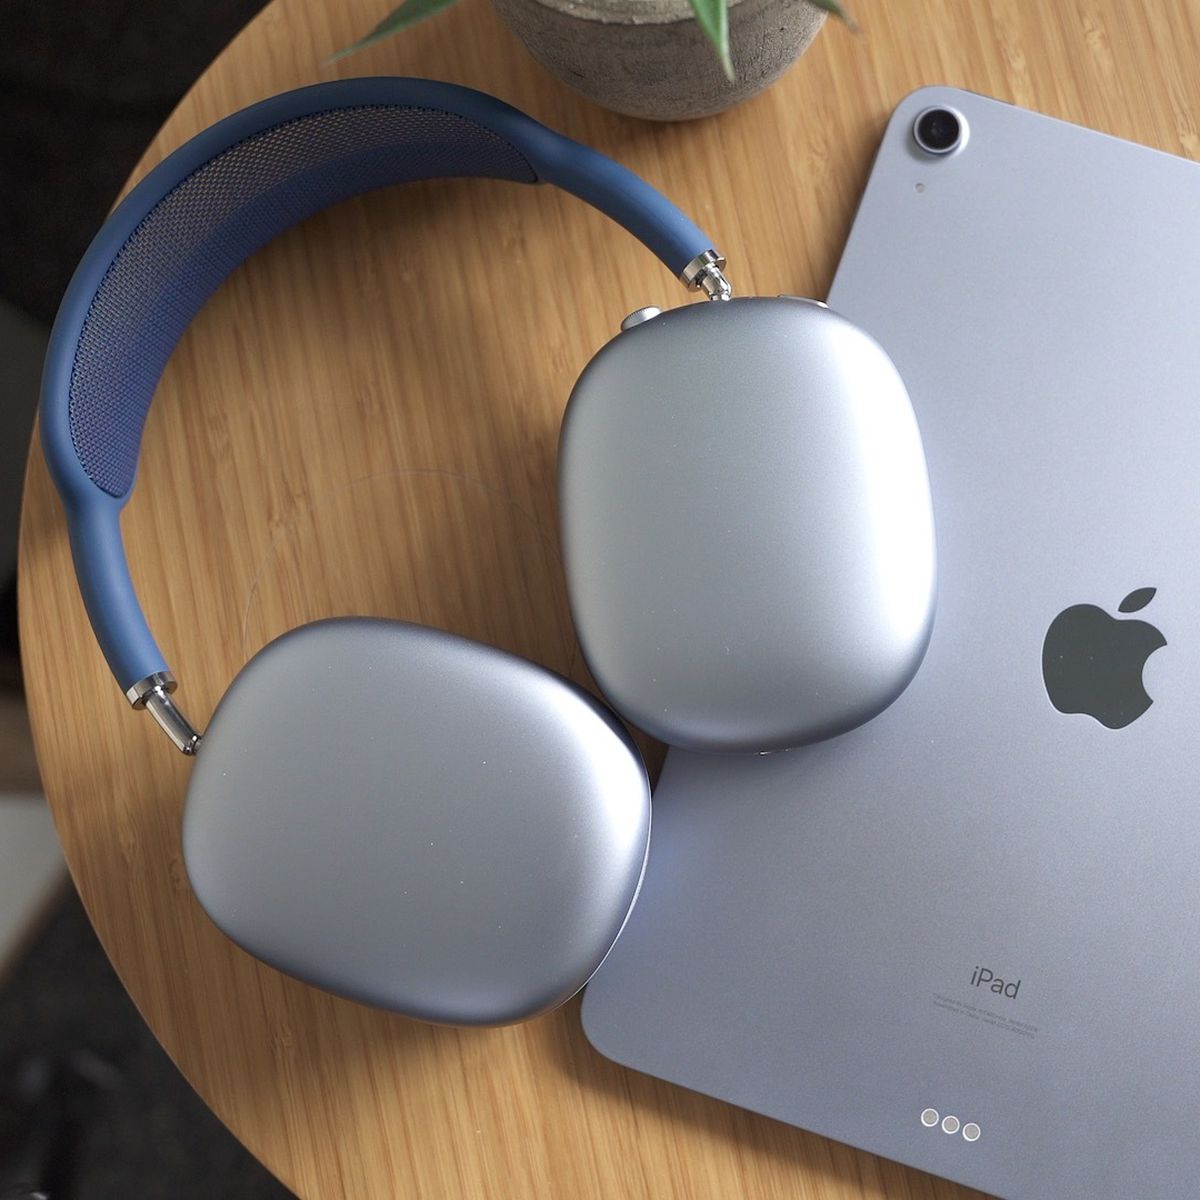 AirPods Max Review: Price, Sound Quality, Comfort, Features, Worth It